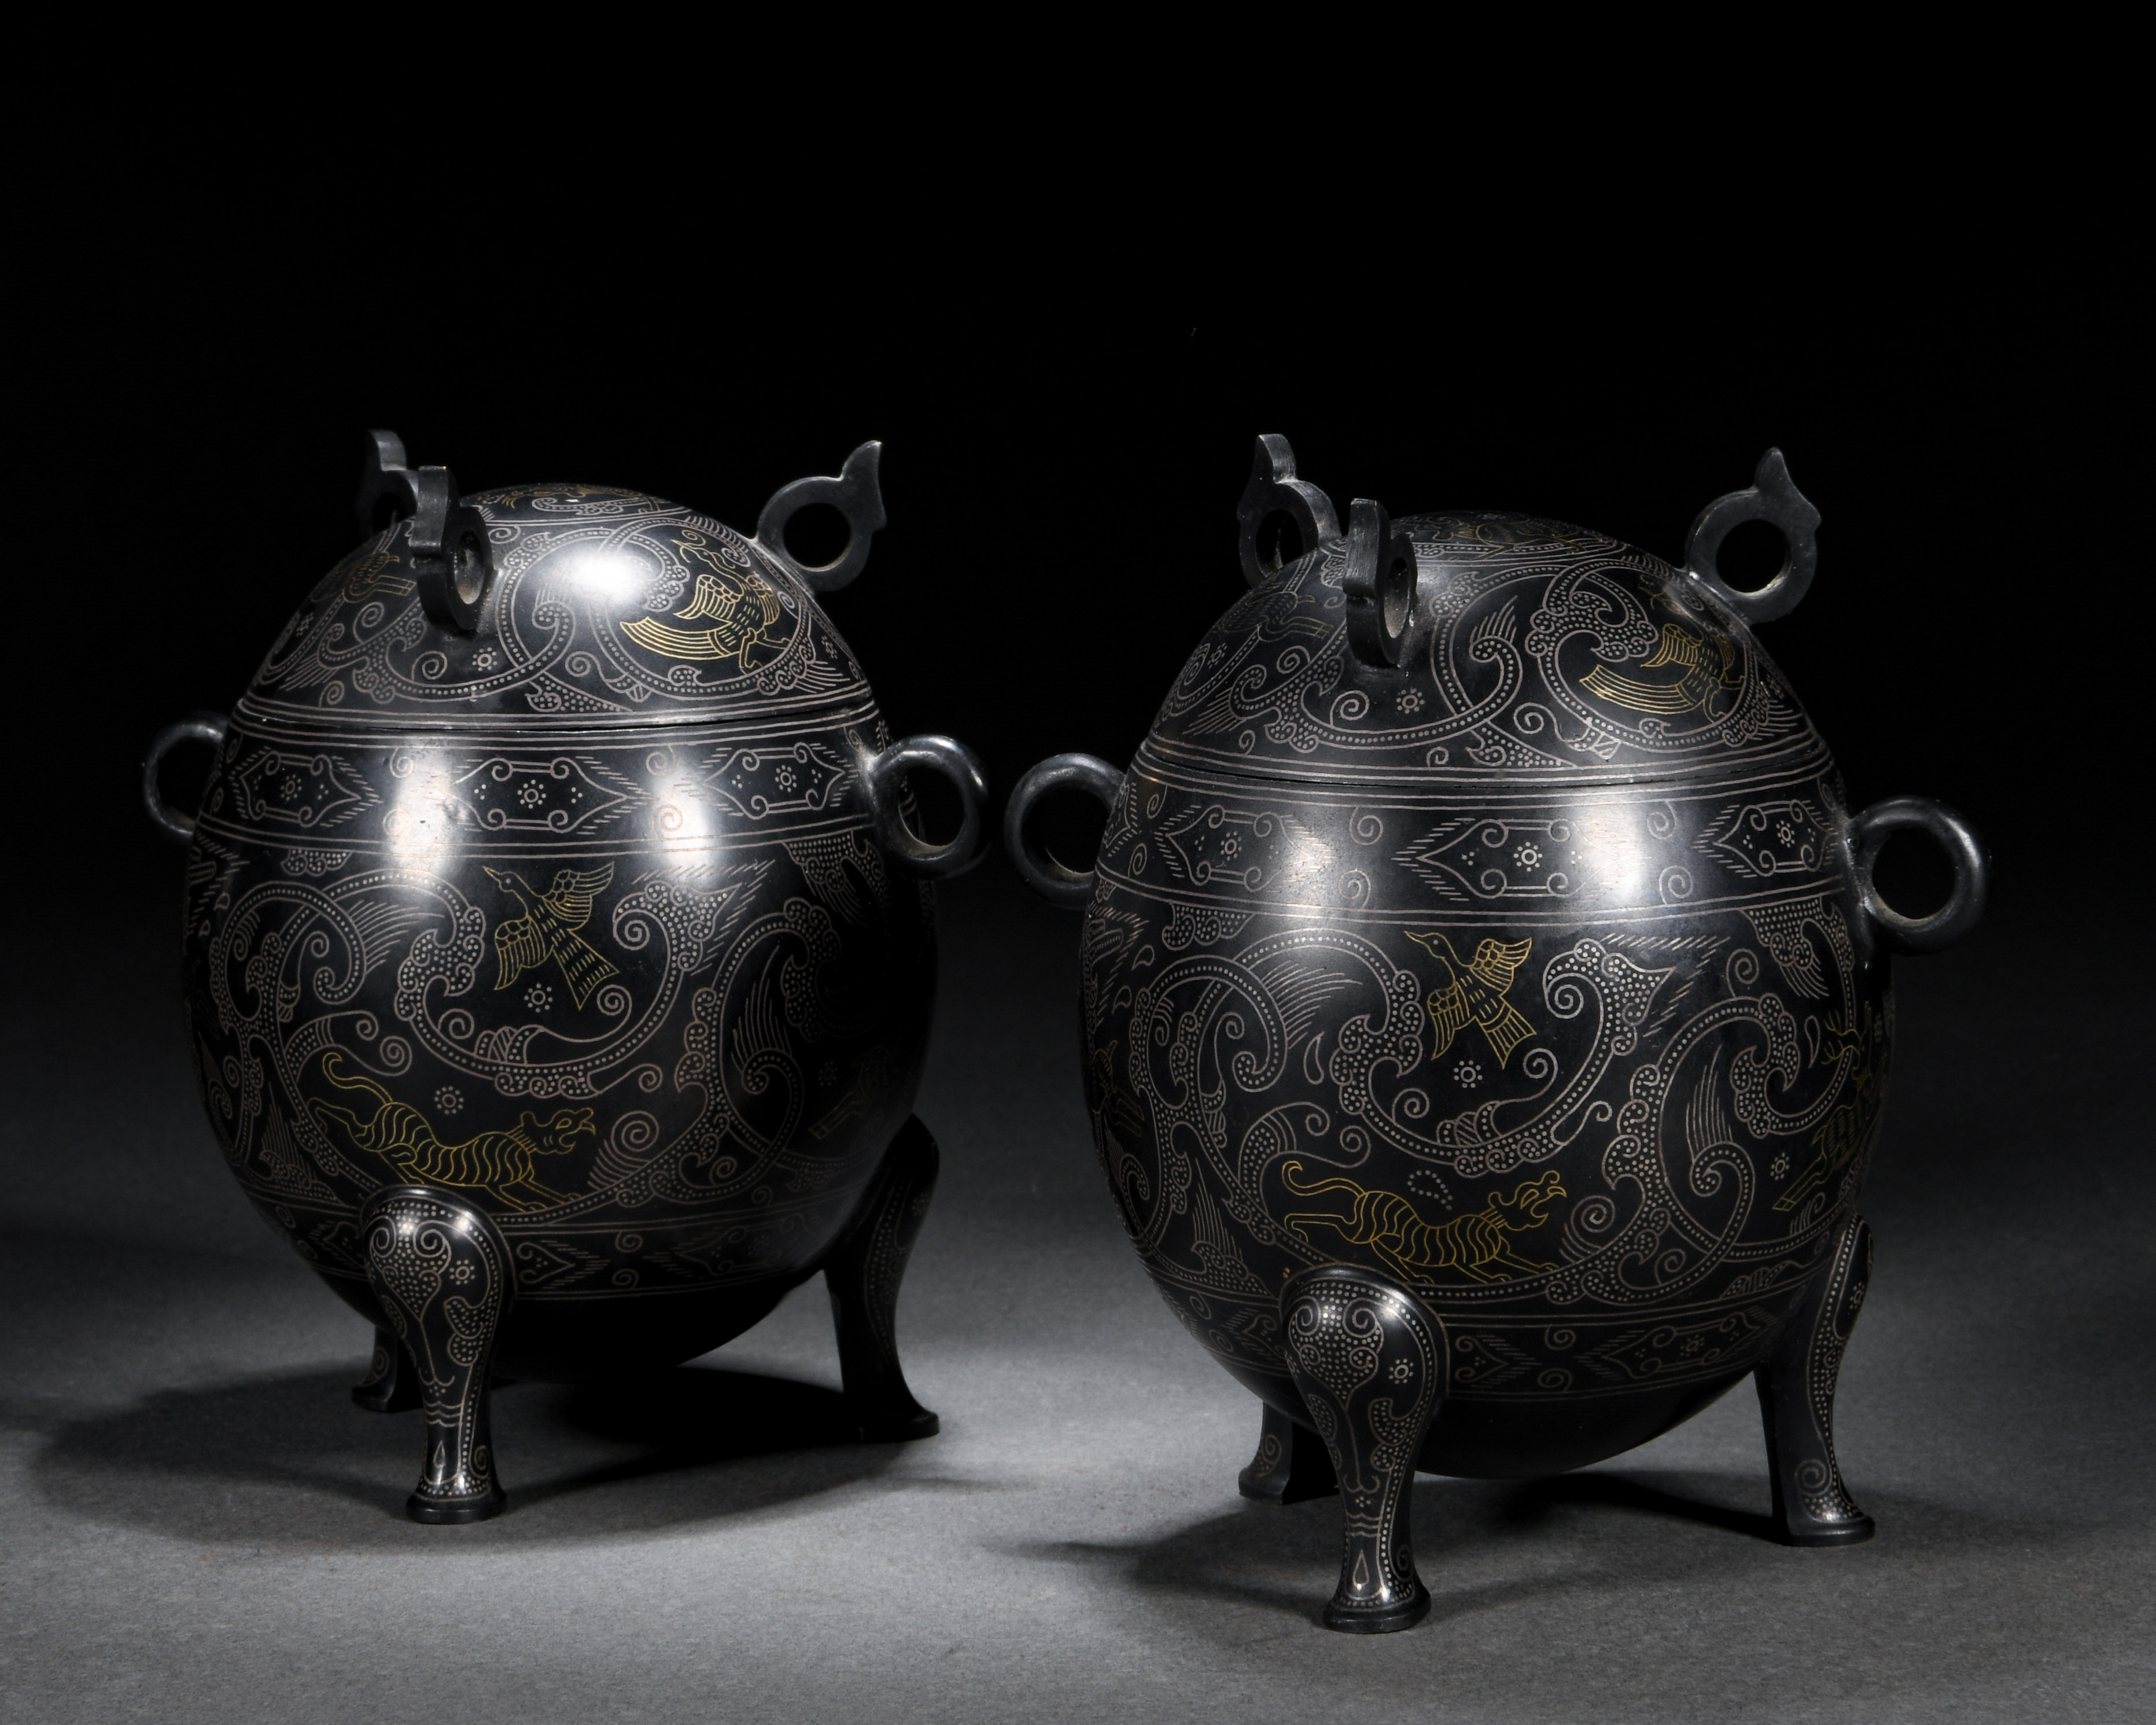 A Chinese Gold and Silver Decorated Vessels Dou - Image 2 of 9